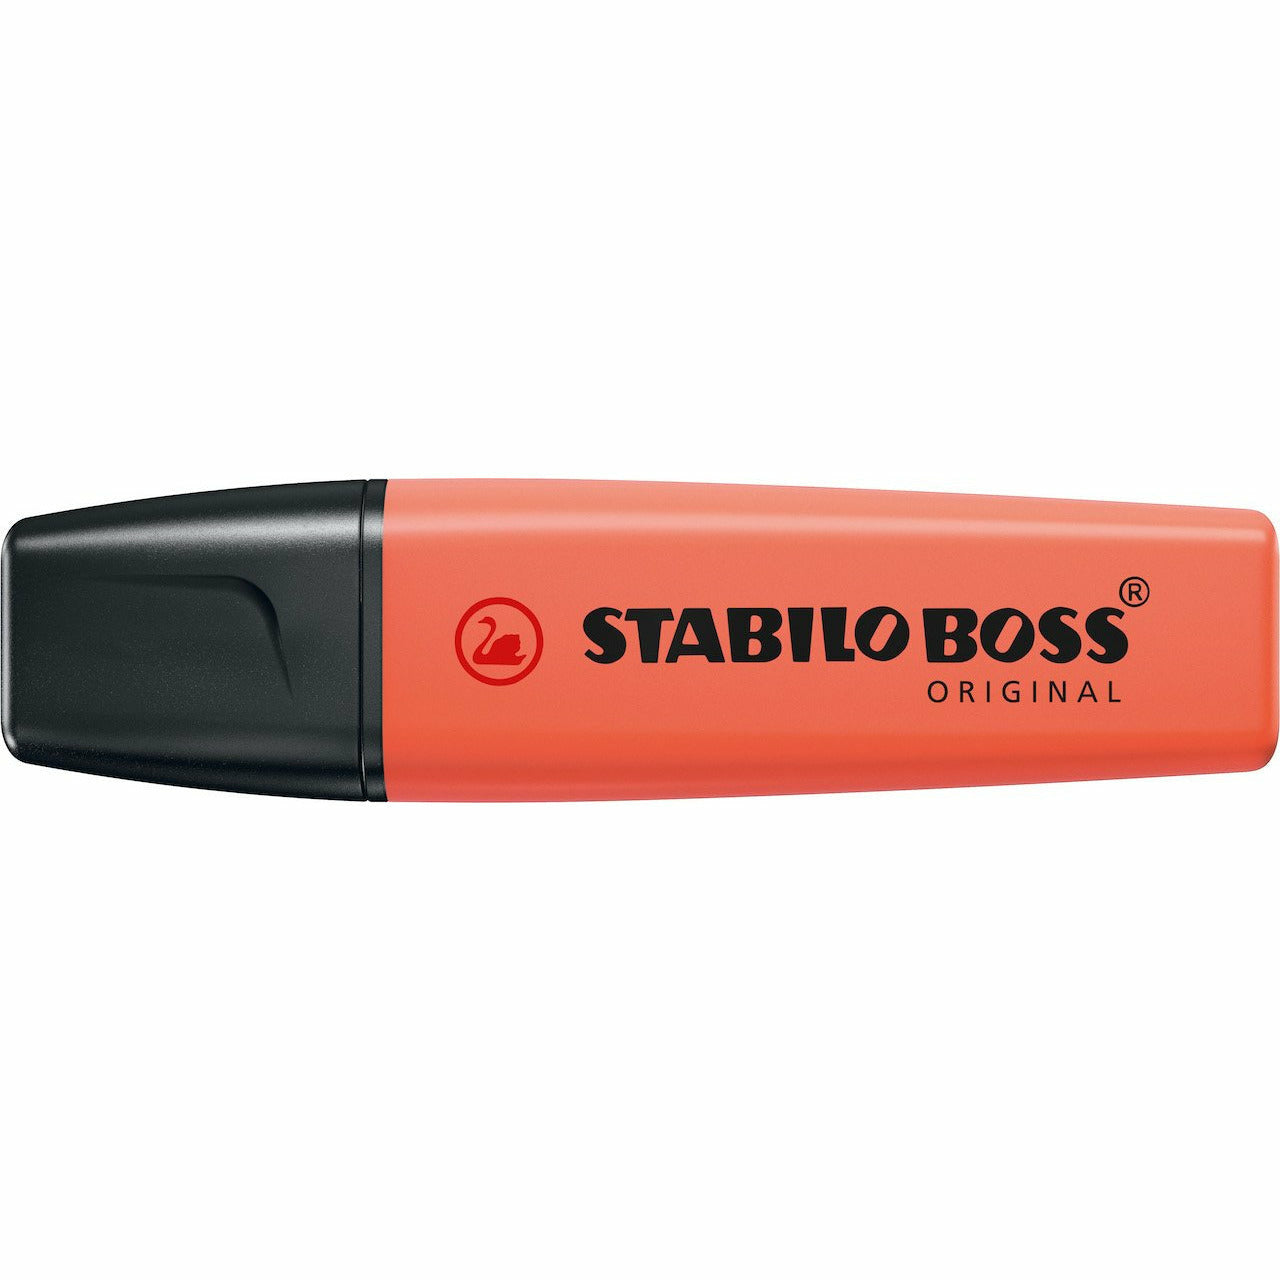 Stabilo Boss pastell mellow coral red